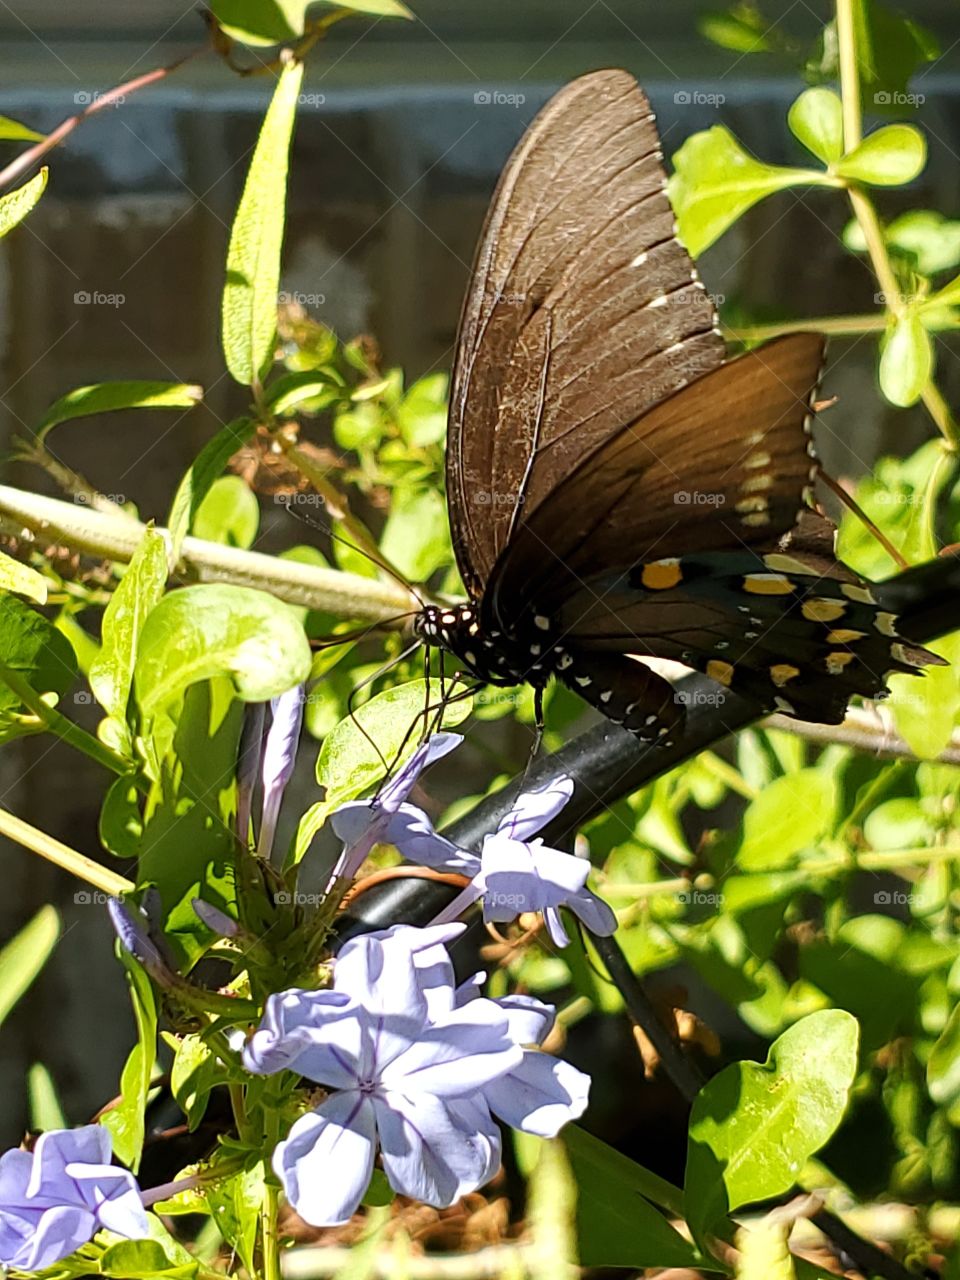 Closeup of a black swallowtail butterfly feeding on nectar from a plumbago flower on a bright sunny day.